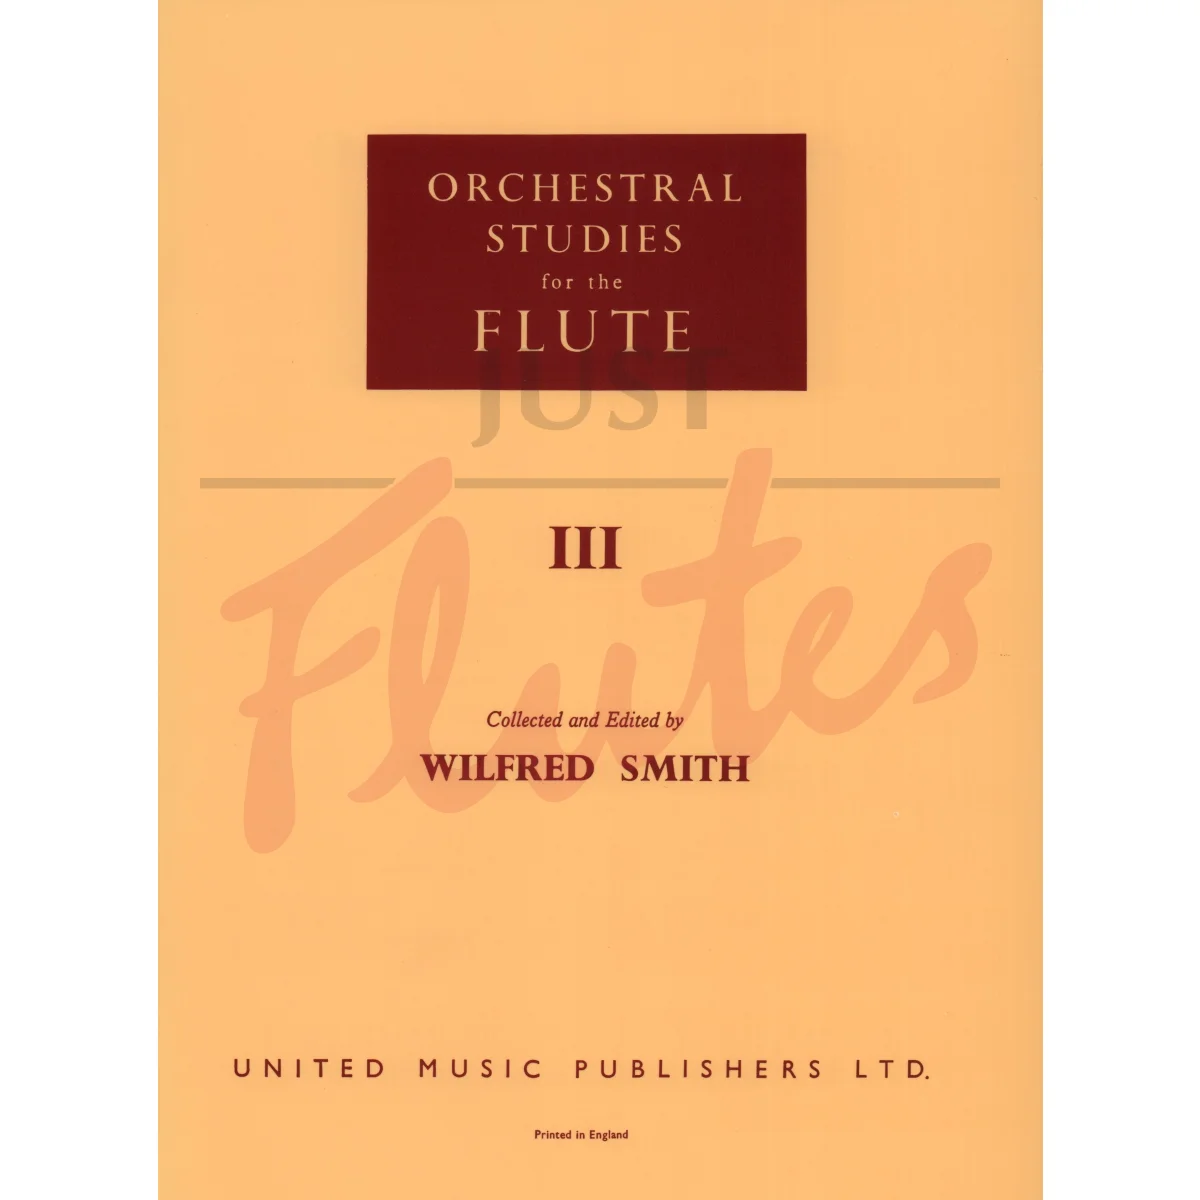 Orchestral Studies for the Flute, Volume 3: Modern French Works